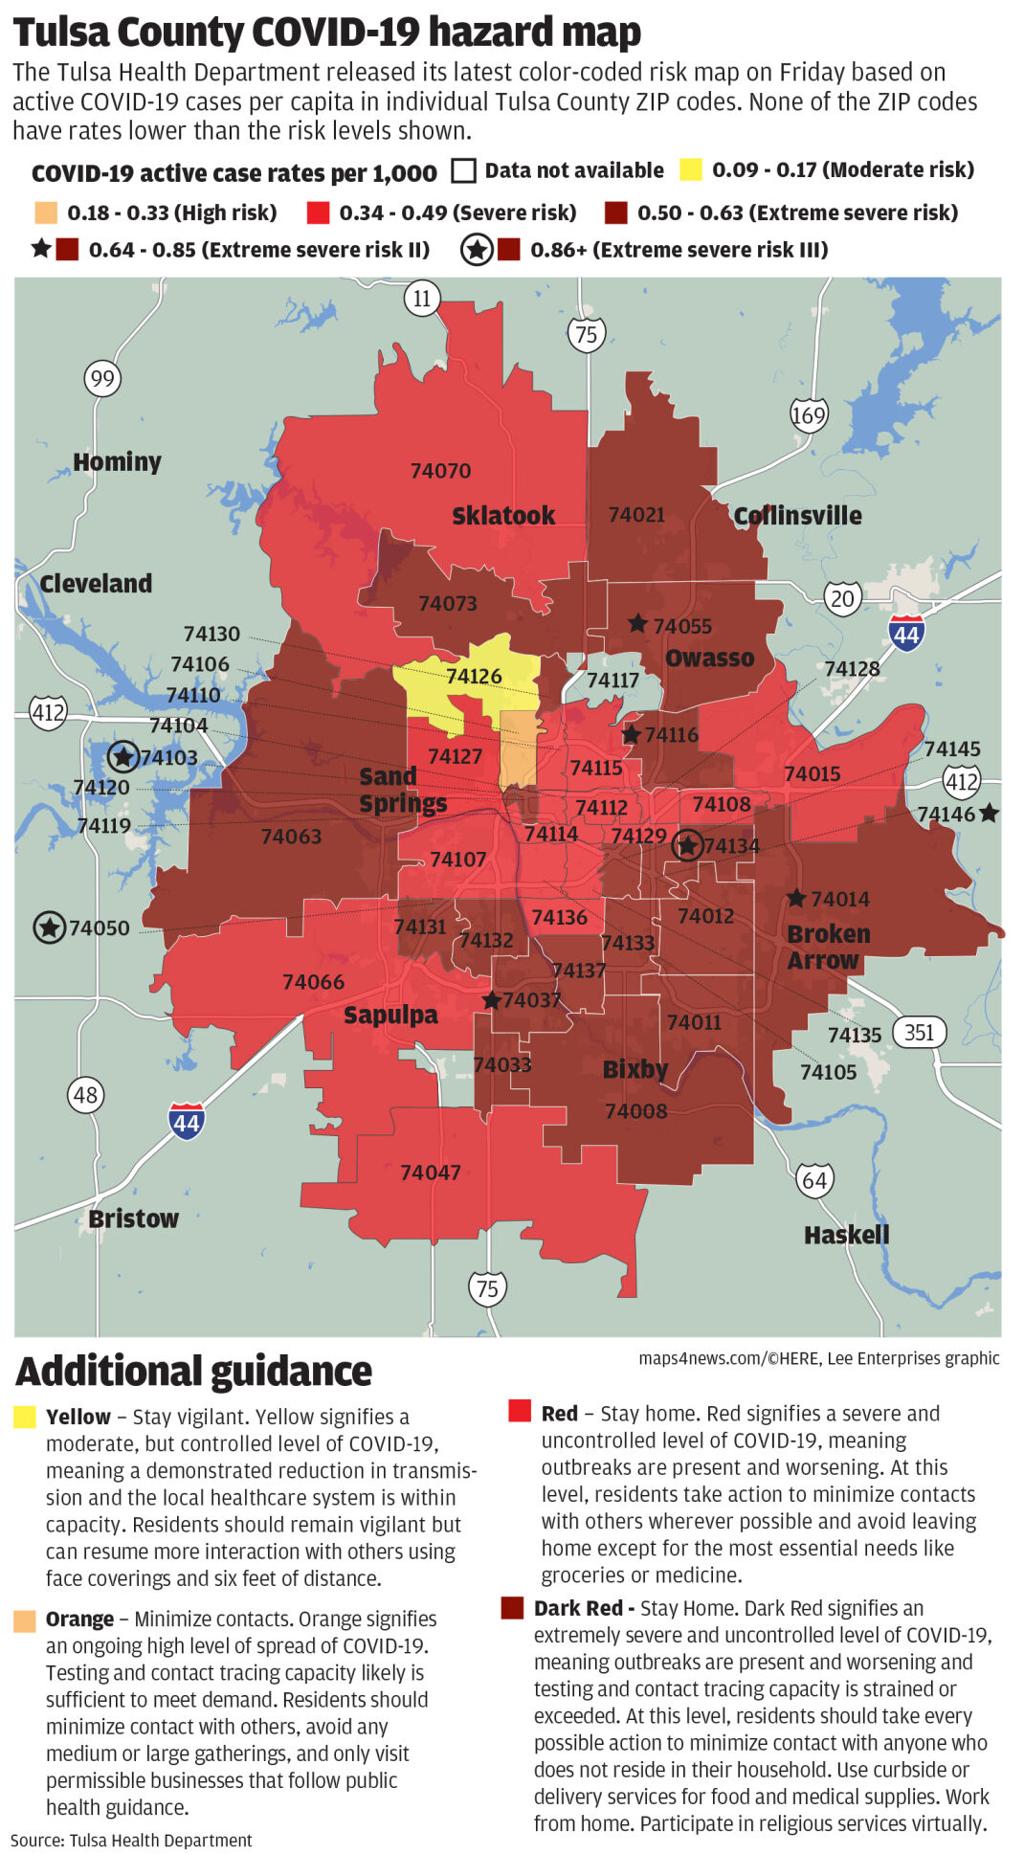 Tulsa County Zip Codes At Extreme Severe Risk Of Covid 19 Spread Double From Last Week Local News Tulsaworld Com